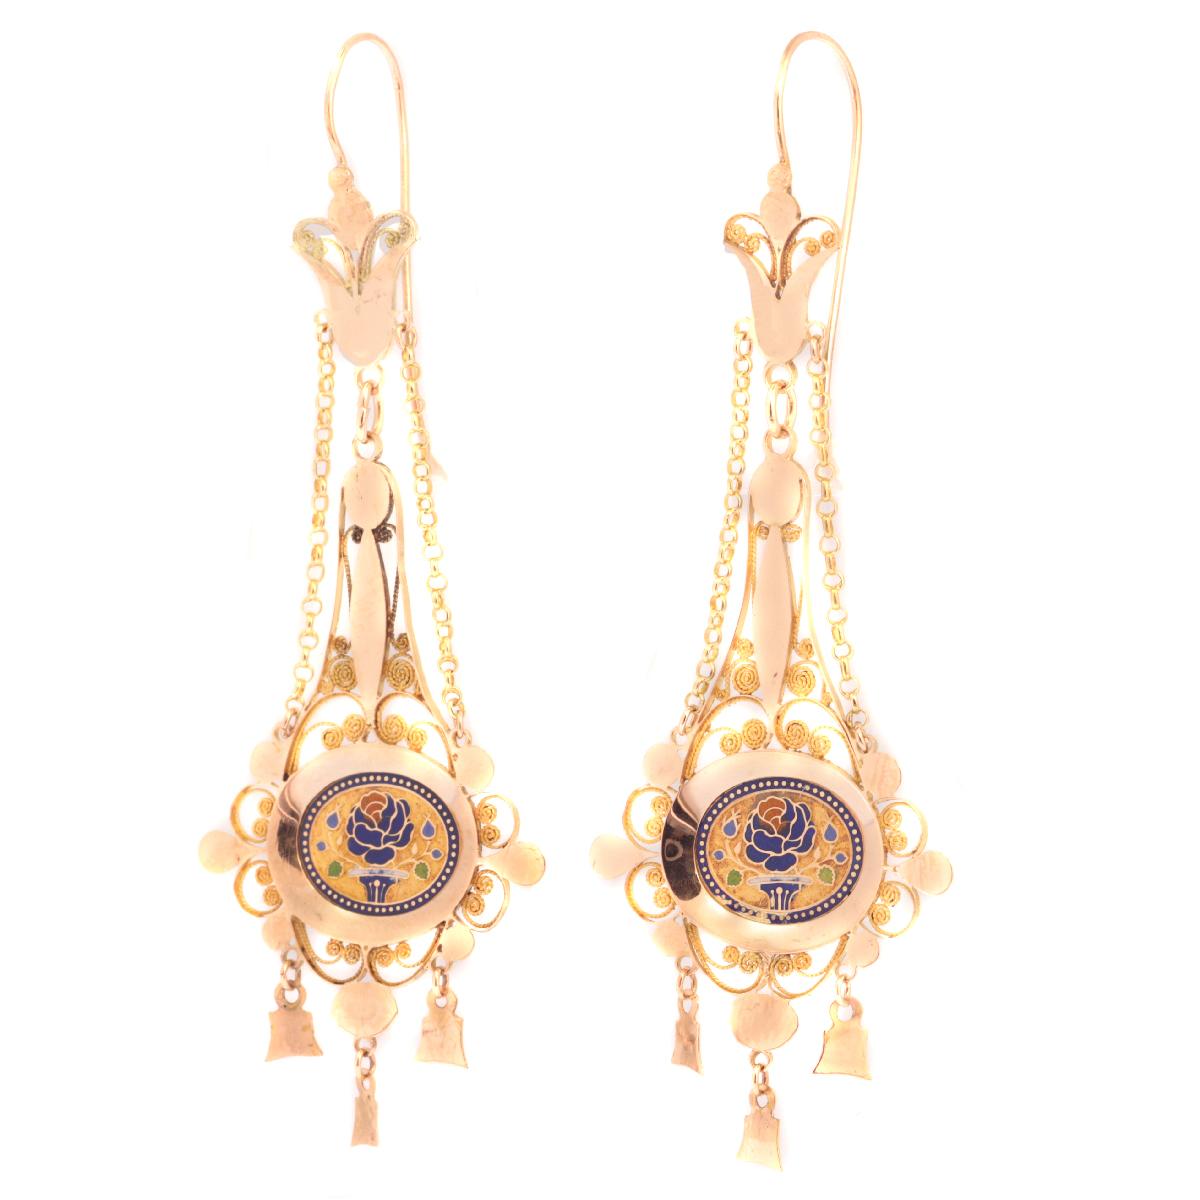 Antique jewelry object group: earrings long hanging

Condition: excellent condition

Do you wish for a 360° view of this unique jewel?
Just send us your request and we’ll give you the direct link to the videoclip showing this treasure’s full